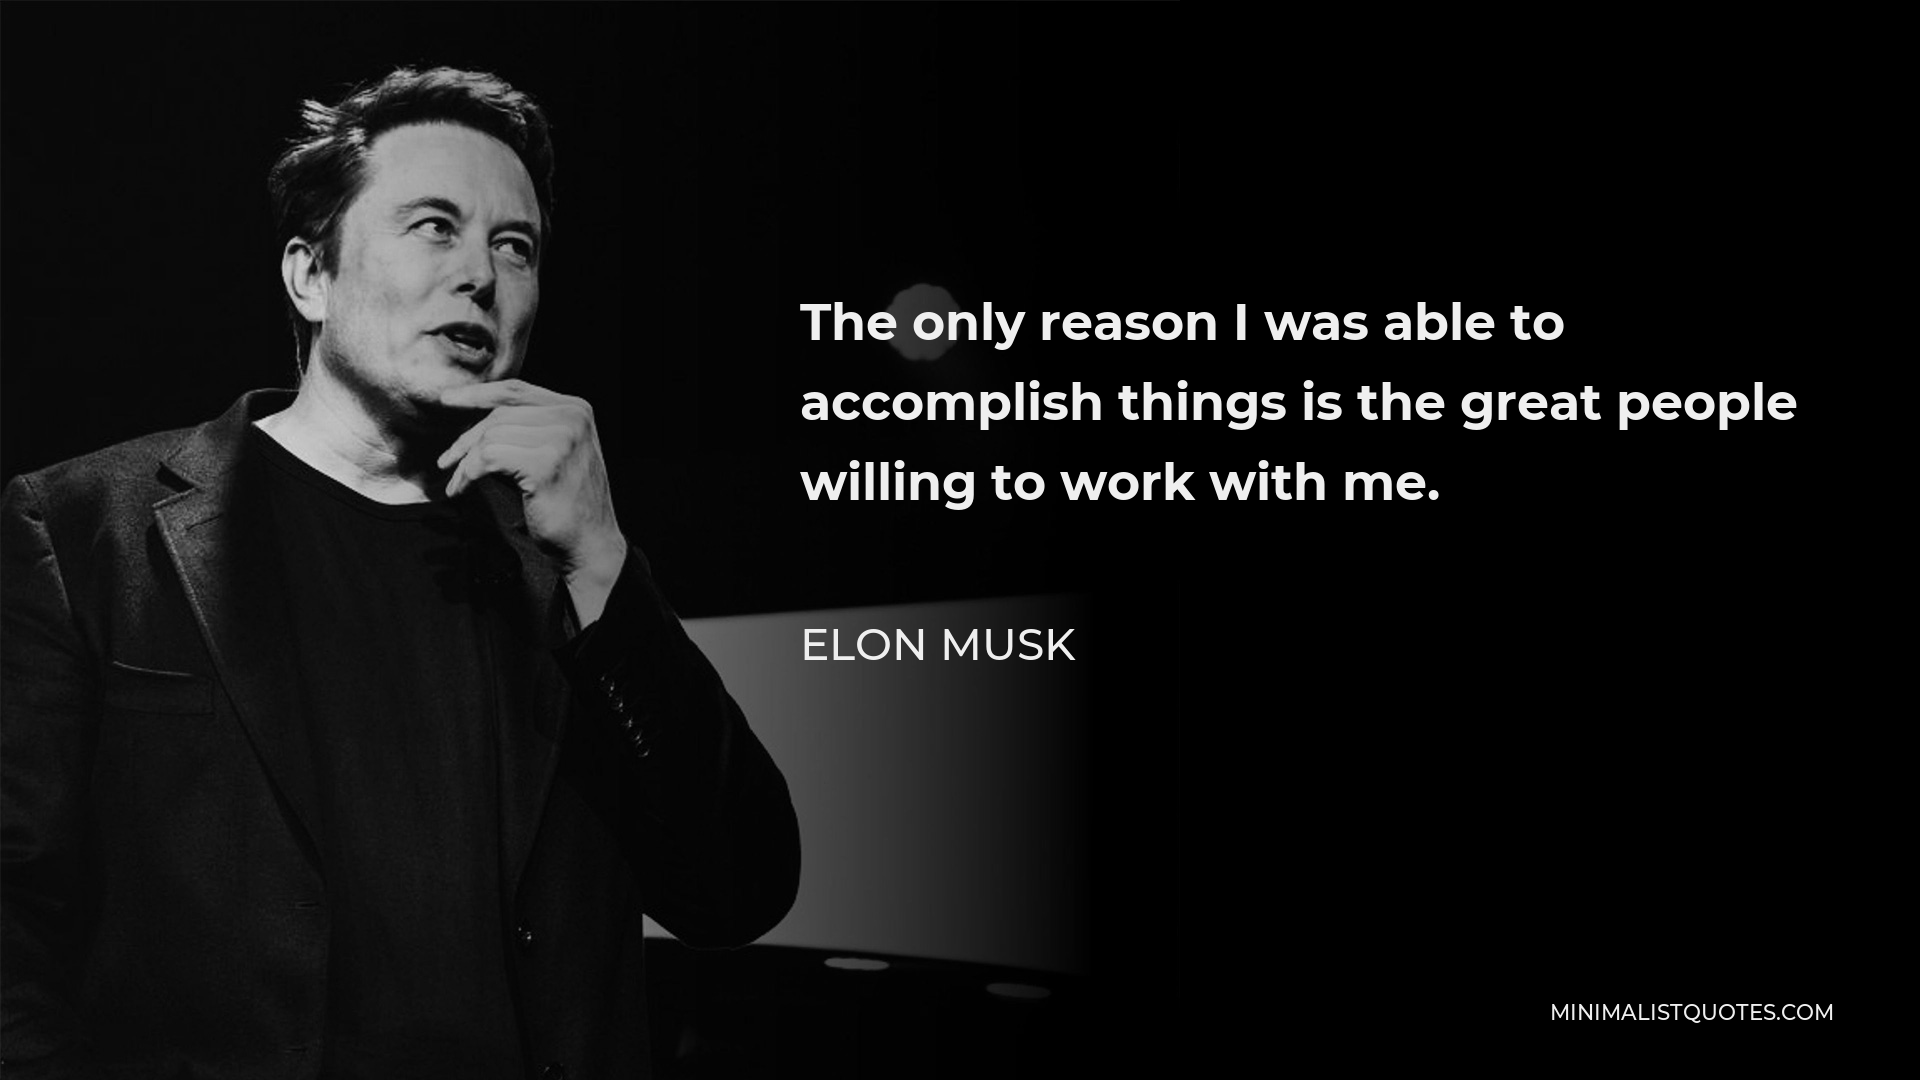 Elon Musk Quote - The only reason I was able to accomplish things is the great people willing to work with me.